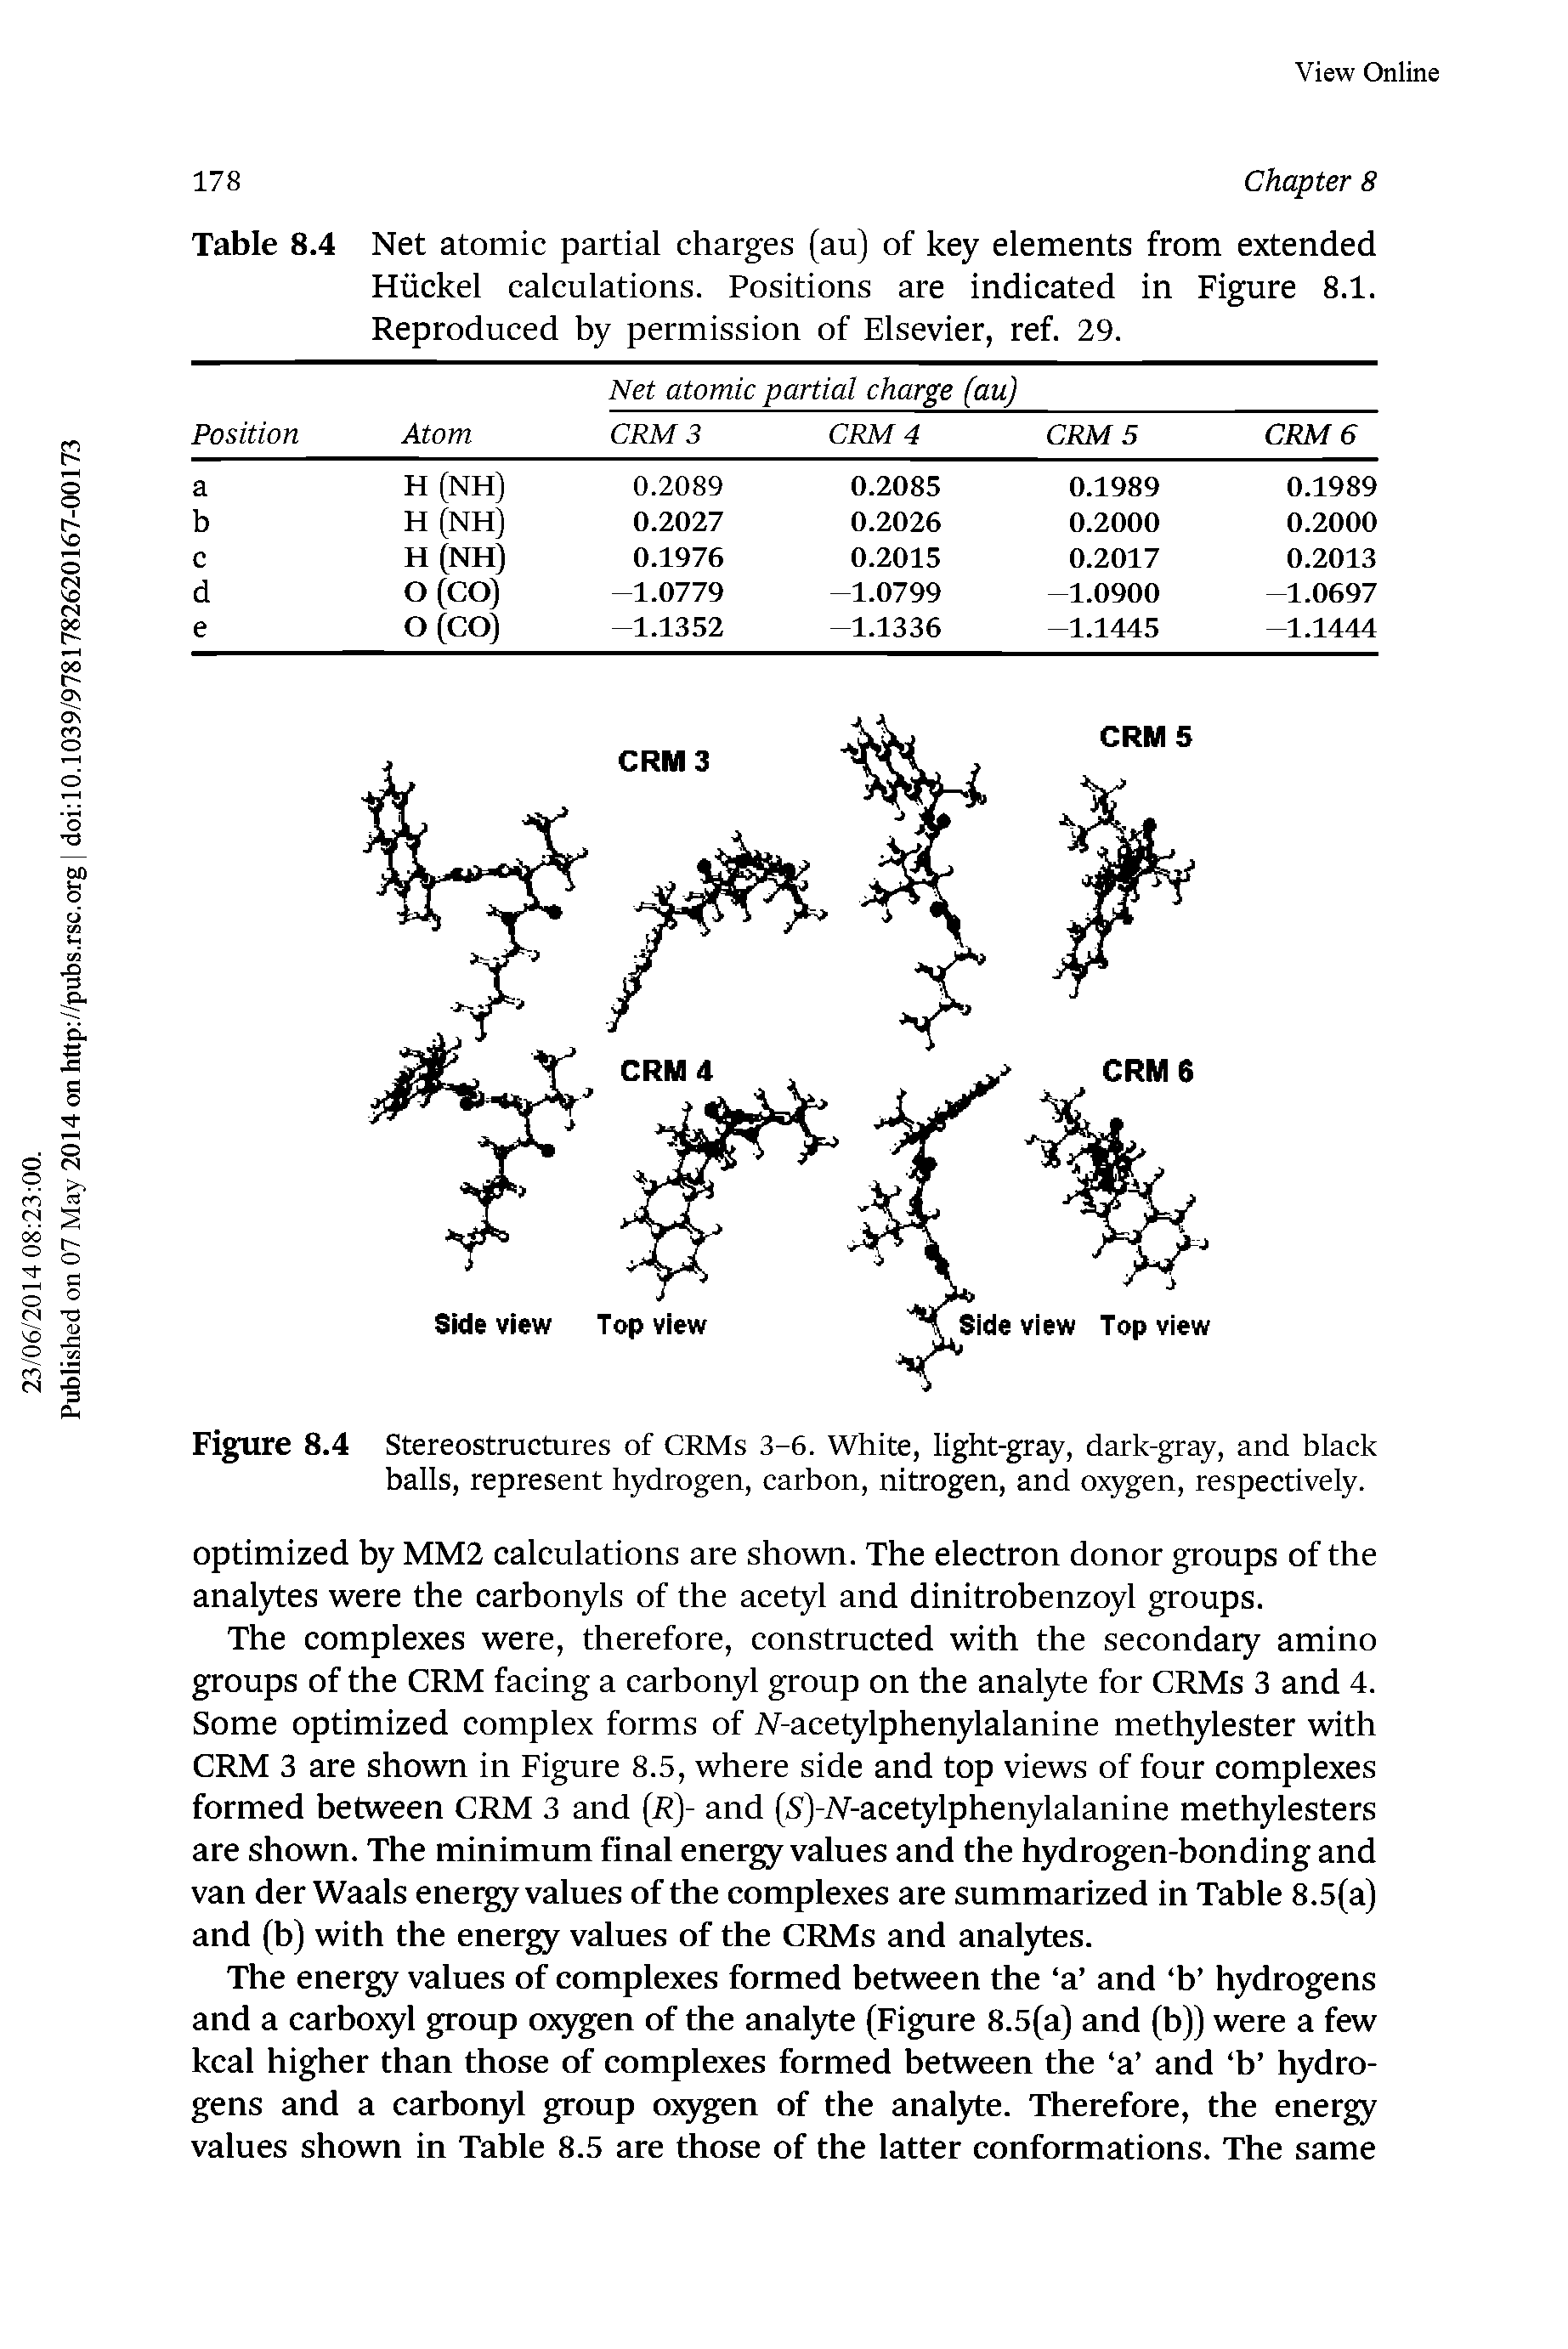 Table 8.4 Net atomic partial charges (au) of key elements from extended Hiickel calculations. Positions are indicated in Figure 8.1. Reproduced by permission of Elsevier, ref. 29.